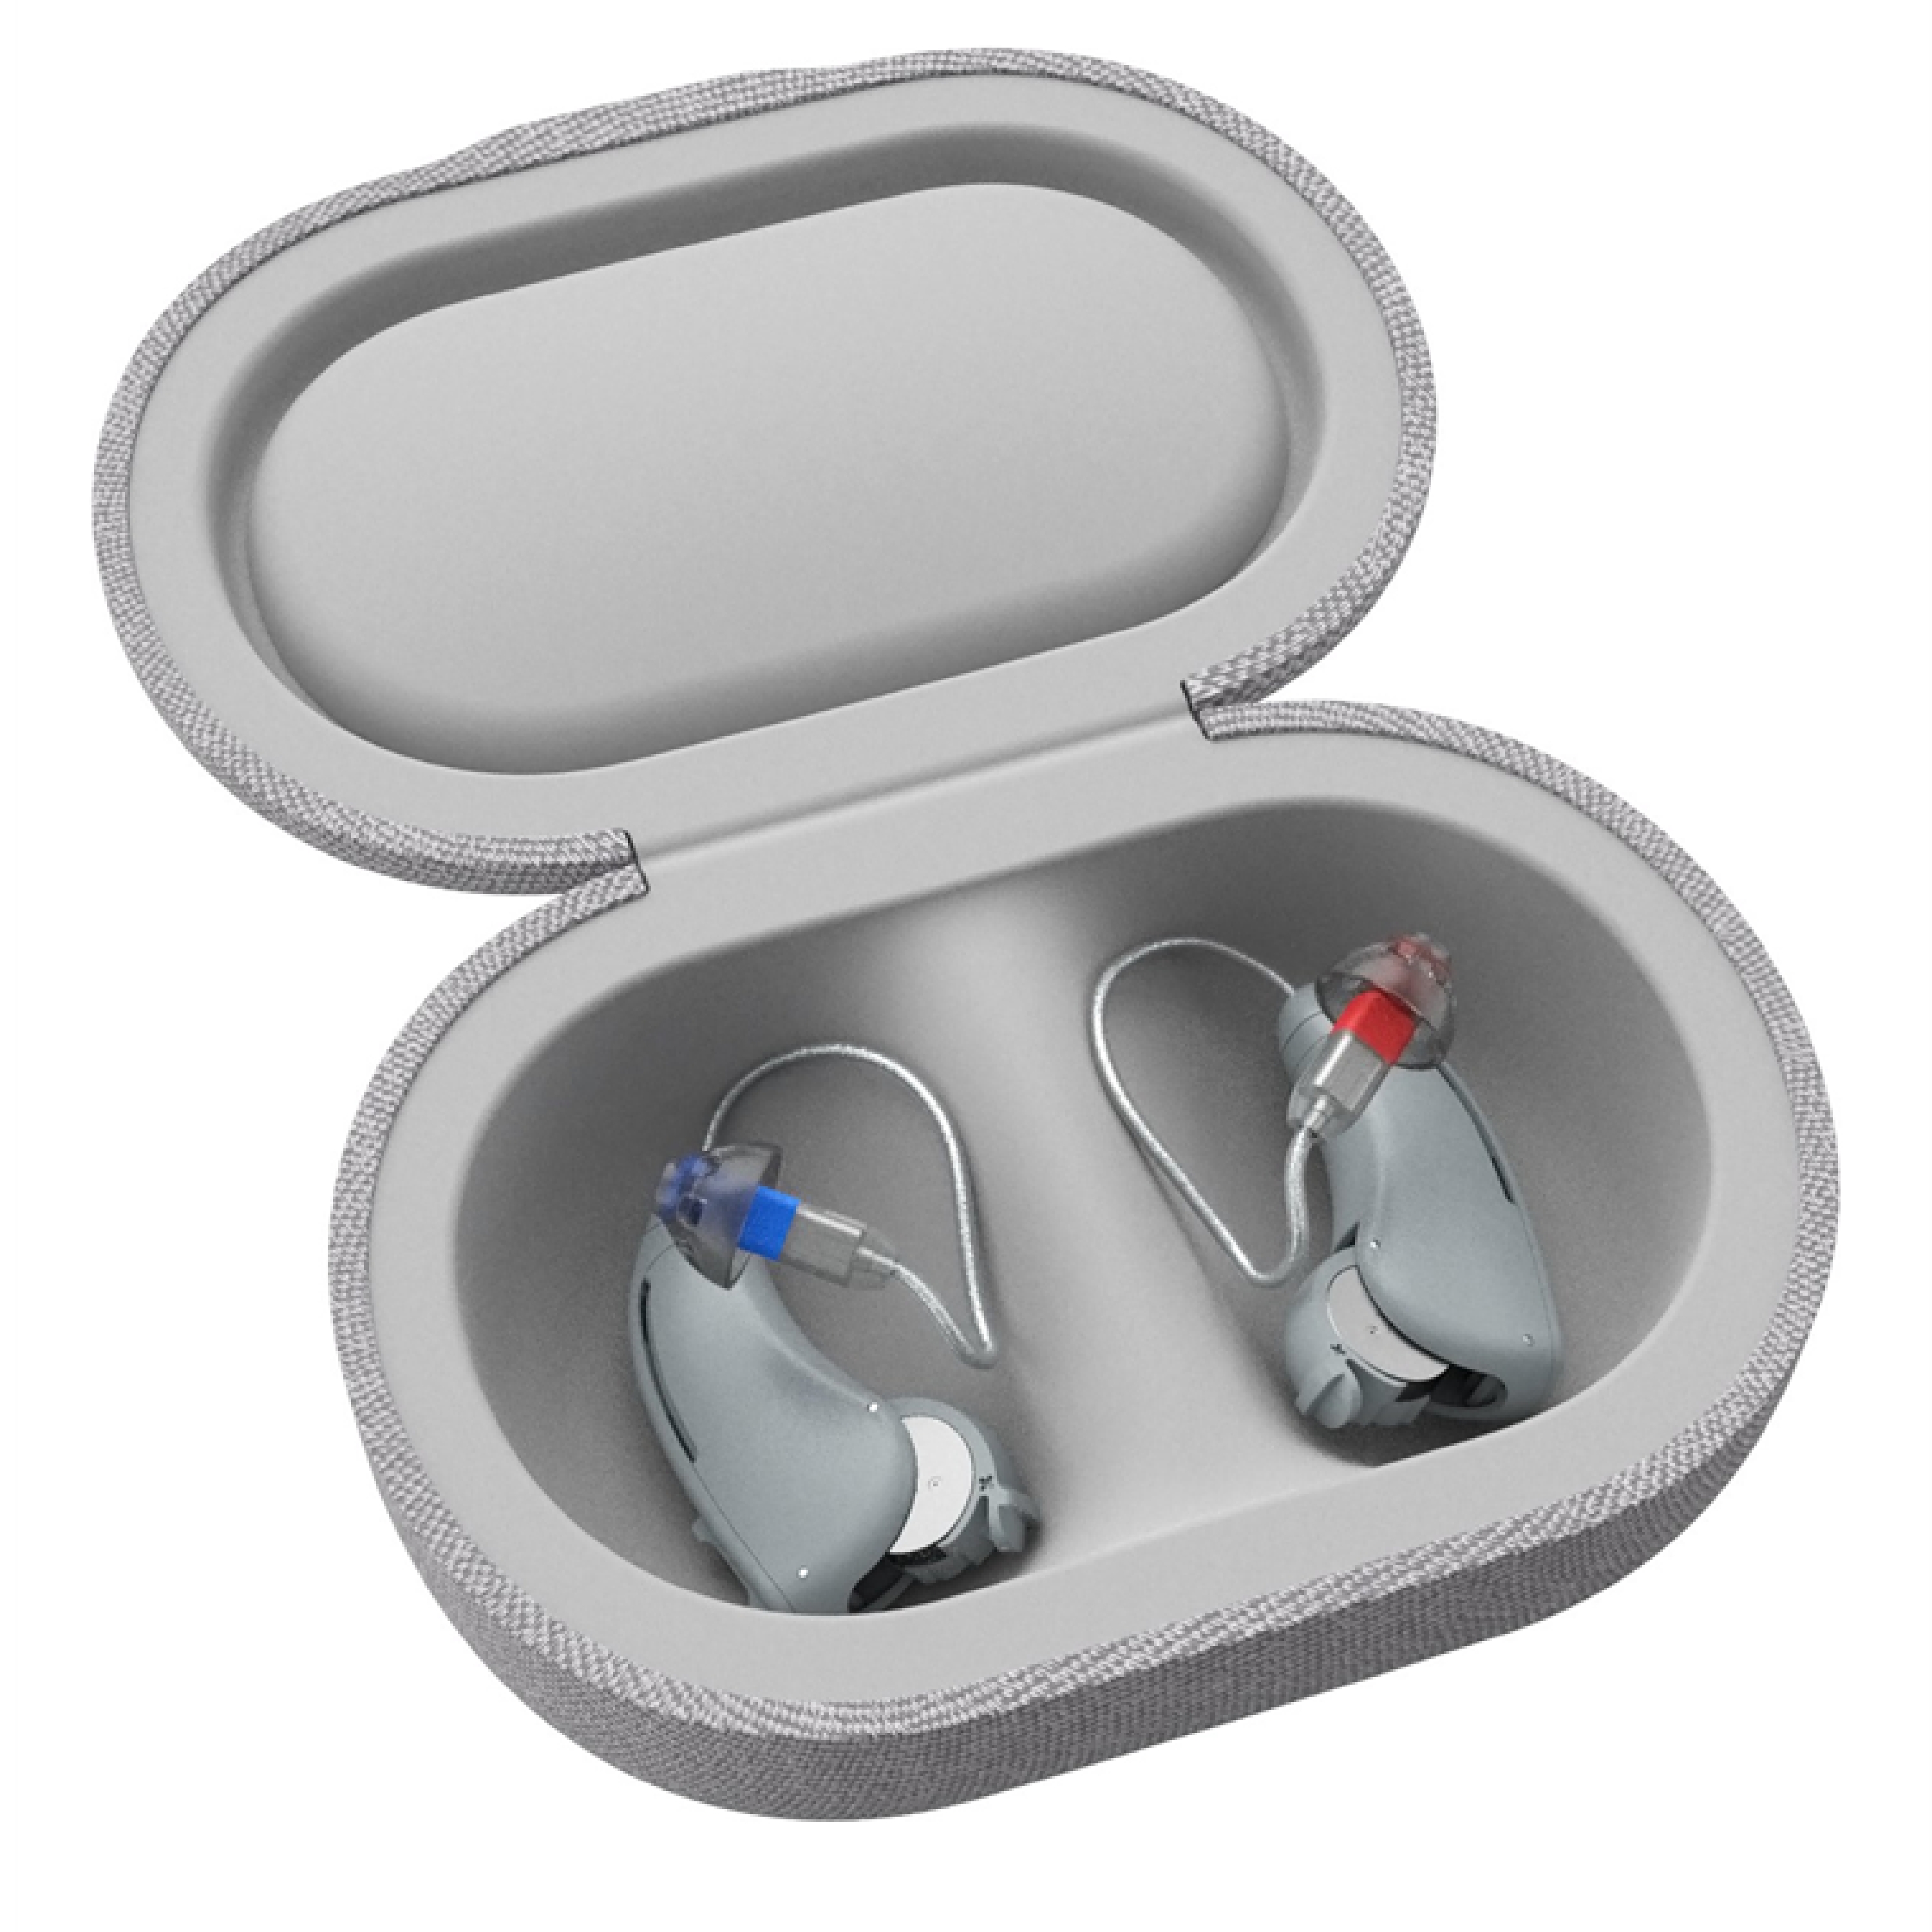 Lexie B1 Self-fitting OTC Hearing Aids Powered by Bose - image 1 of 7